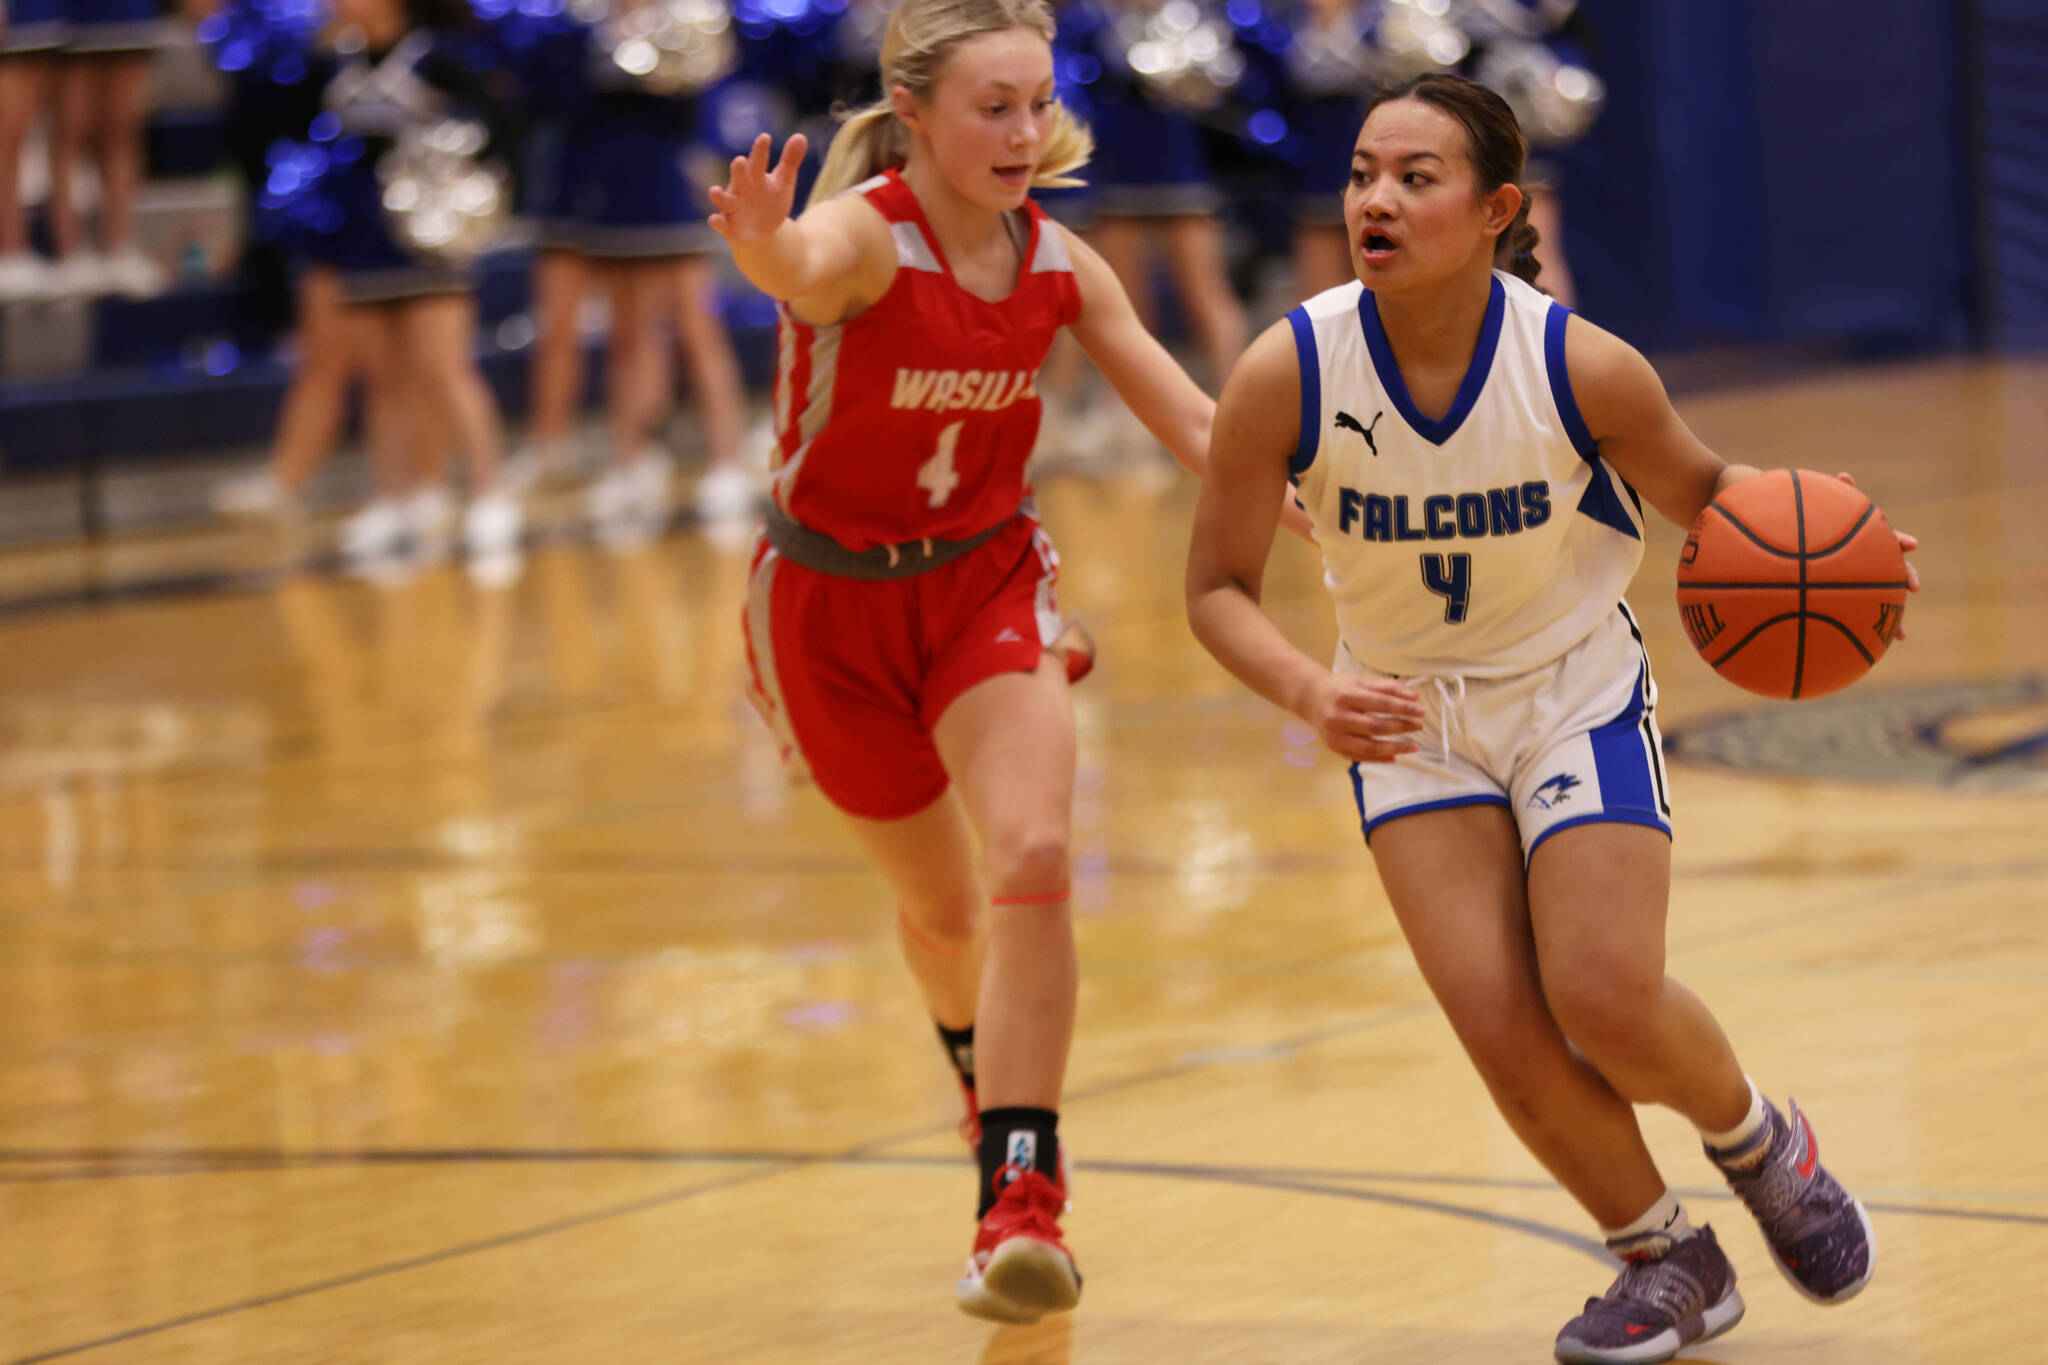 Mikah Carandang dribbles while surveying the court during a home game against Wasilla. She was tightly defended by Meilee Merchant. (Ben Hohenstatt / Juneau Empire File)